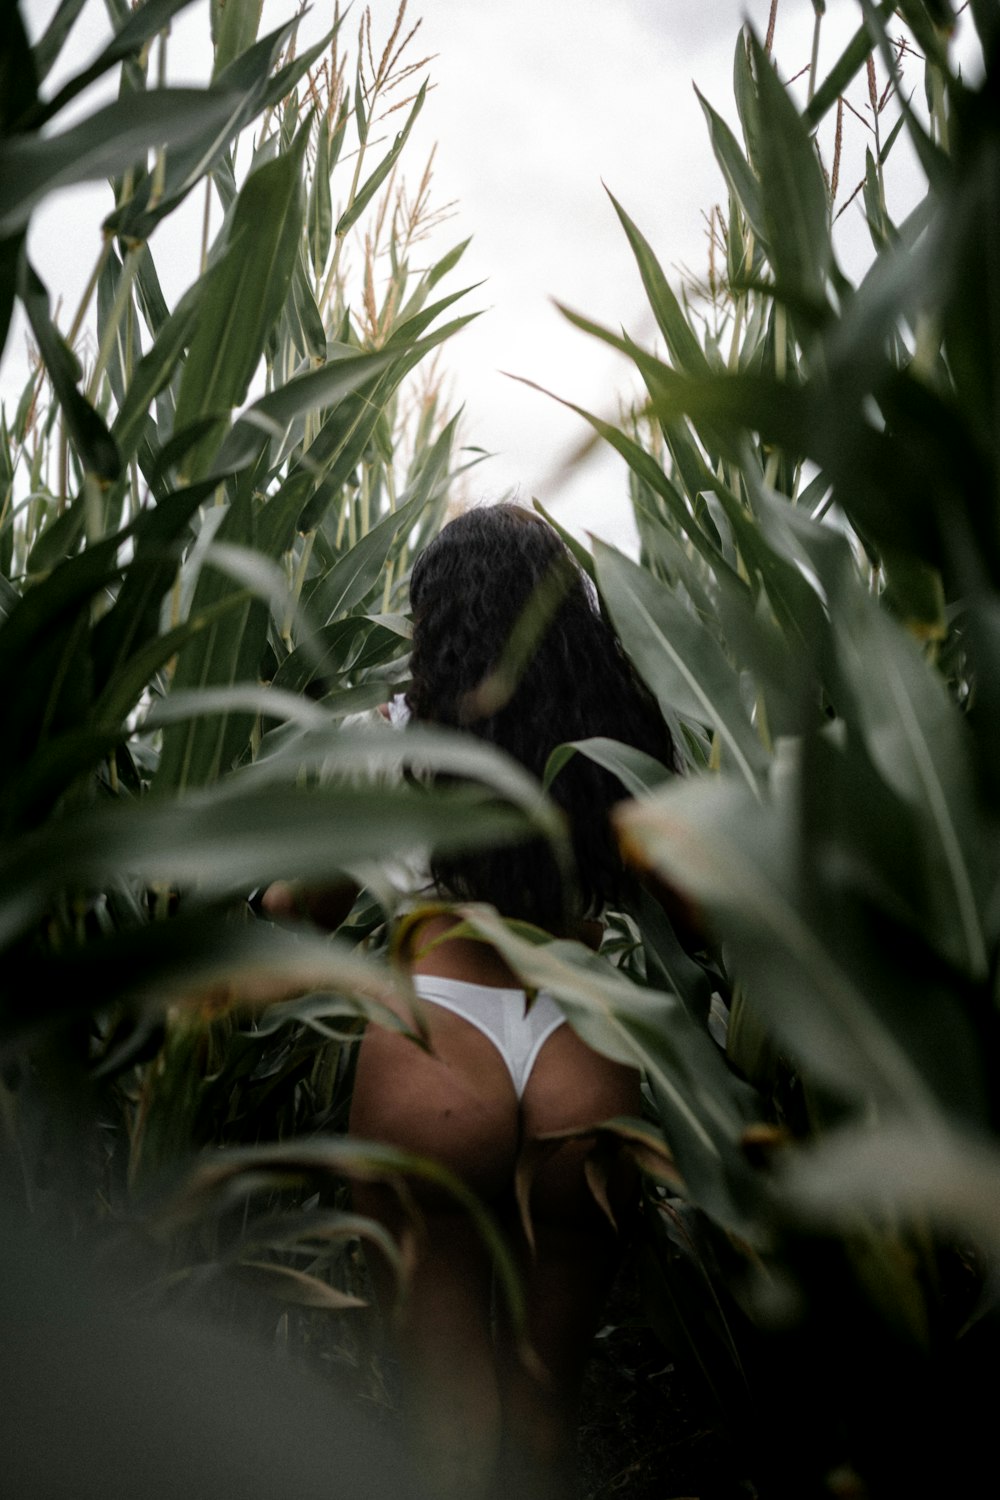 woman in black and white bikini bottom standing in the middle of green plants during daytime